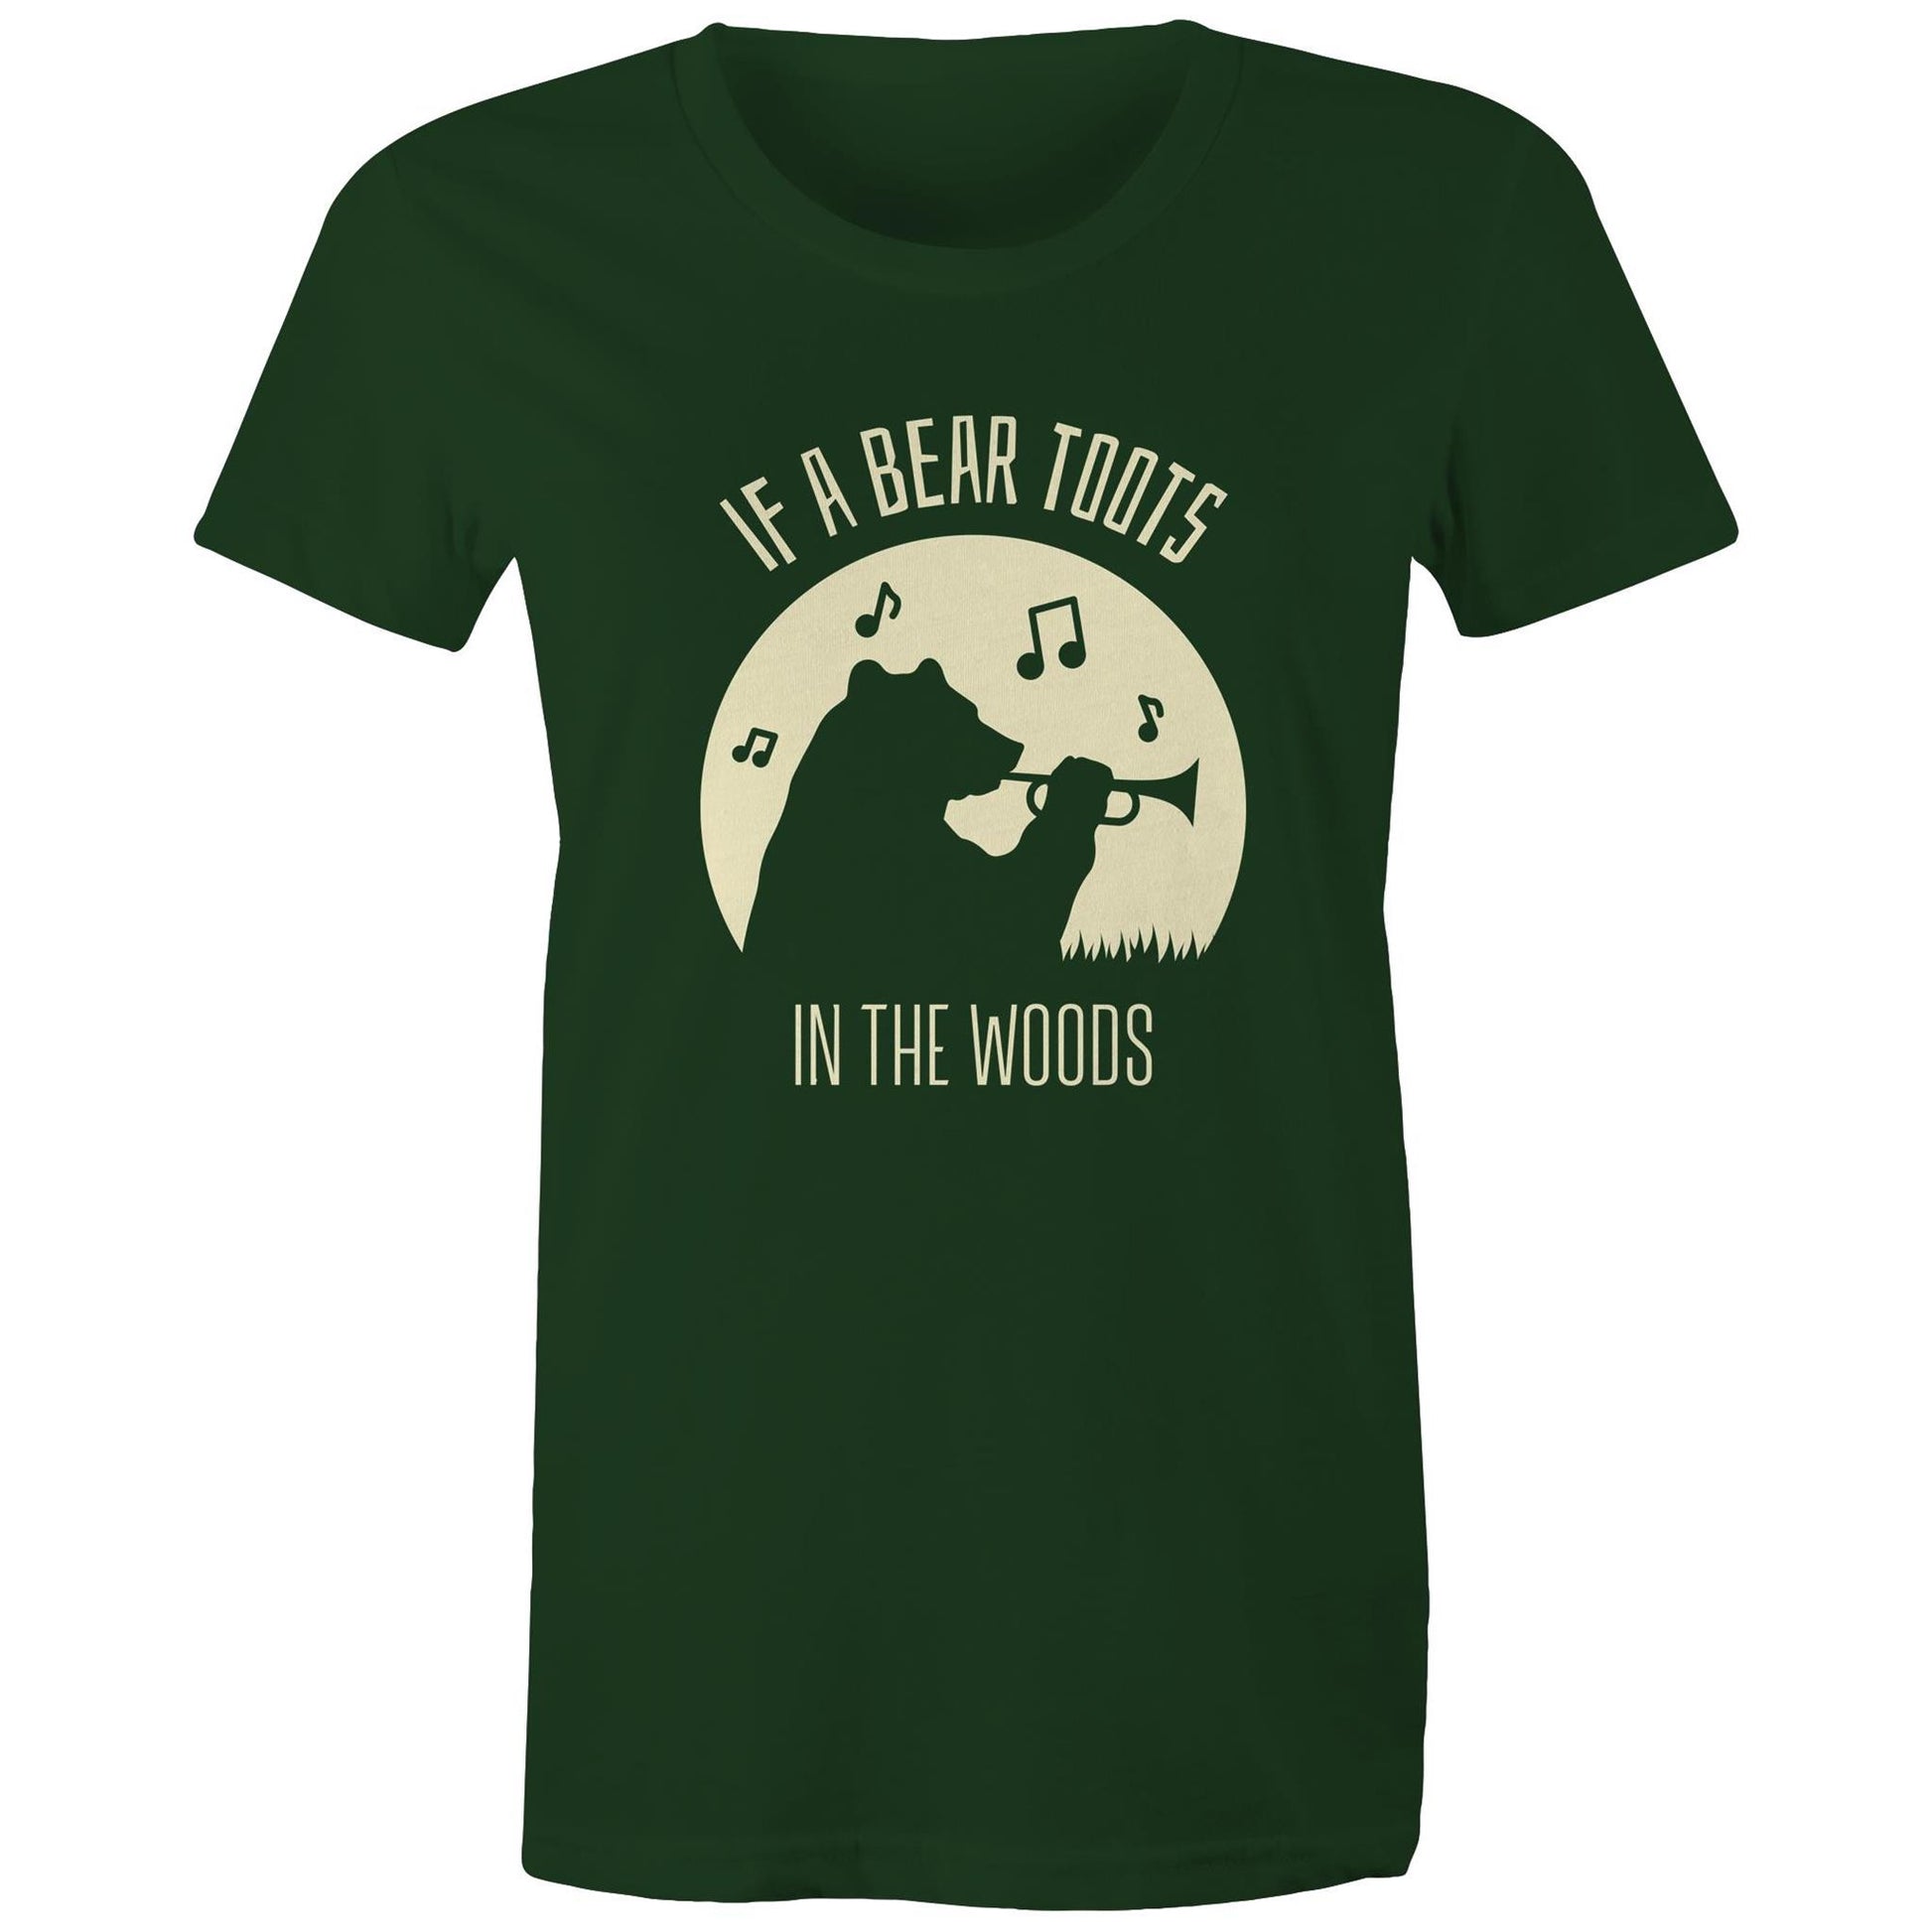 If A Bear Toots In The Woods, Trumpet Player - Womens T-shirt Forest Green Womens T-shirt animal Music